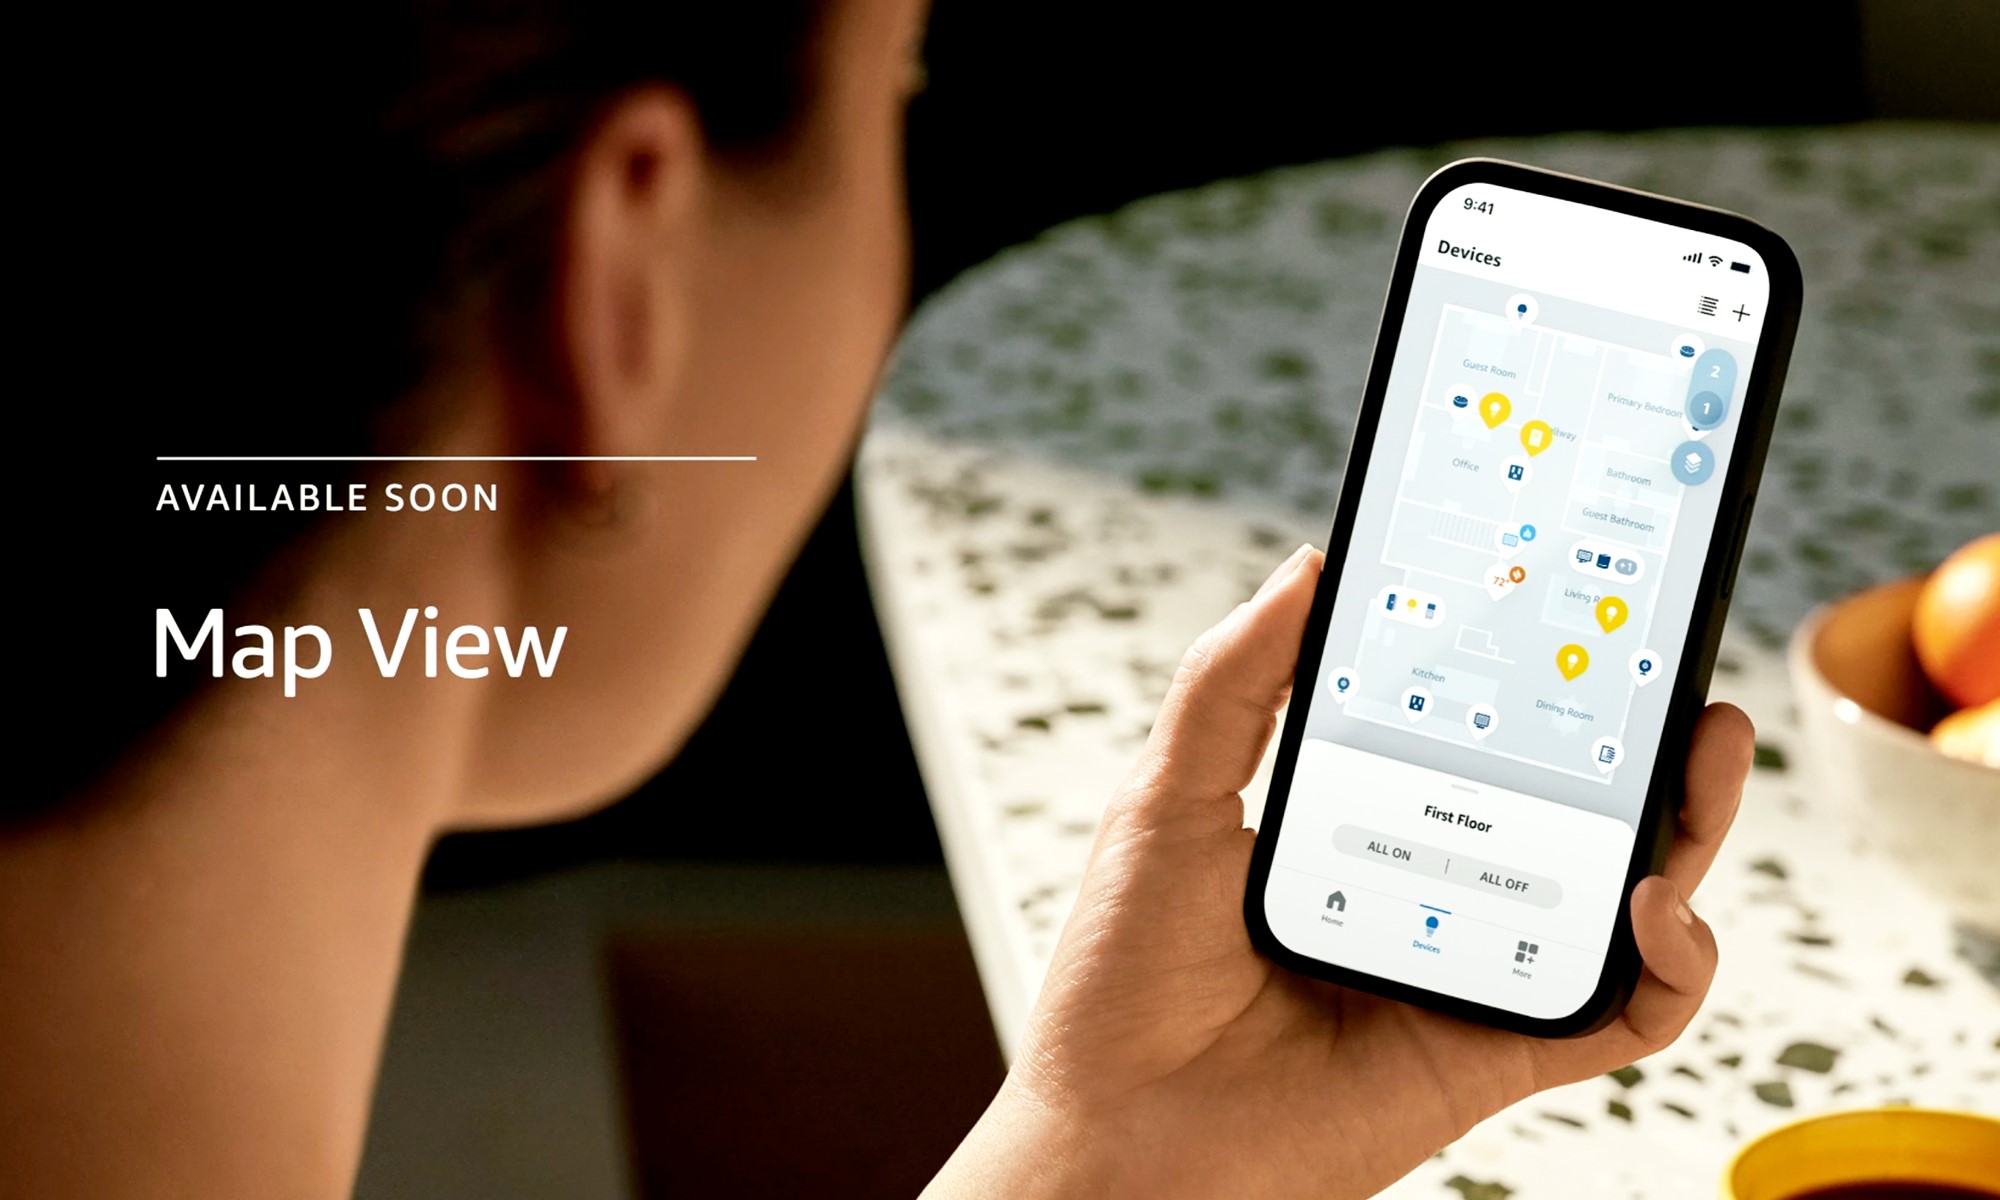 Amazon product photo showcasing Map View. View from over a person's right shoulder as they hold a smartphone. The phone's screen shows a digital floor plan with icons representing smart devices around it. | DeviceDaily.com